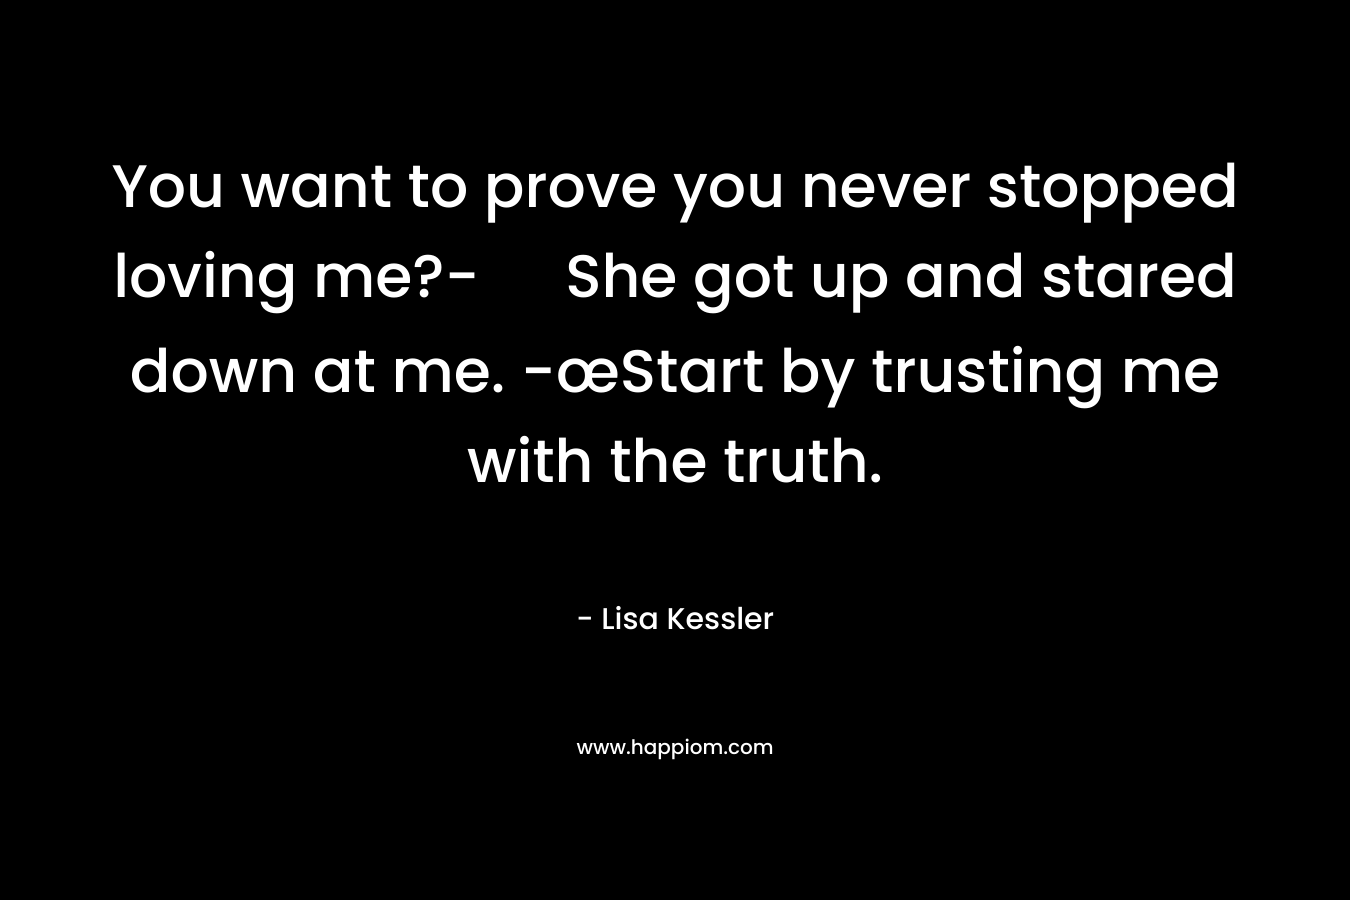 You want to prove you never stopped loving me?- She got up and stared down at me. -œStart by trusting me with the truth.